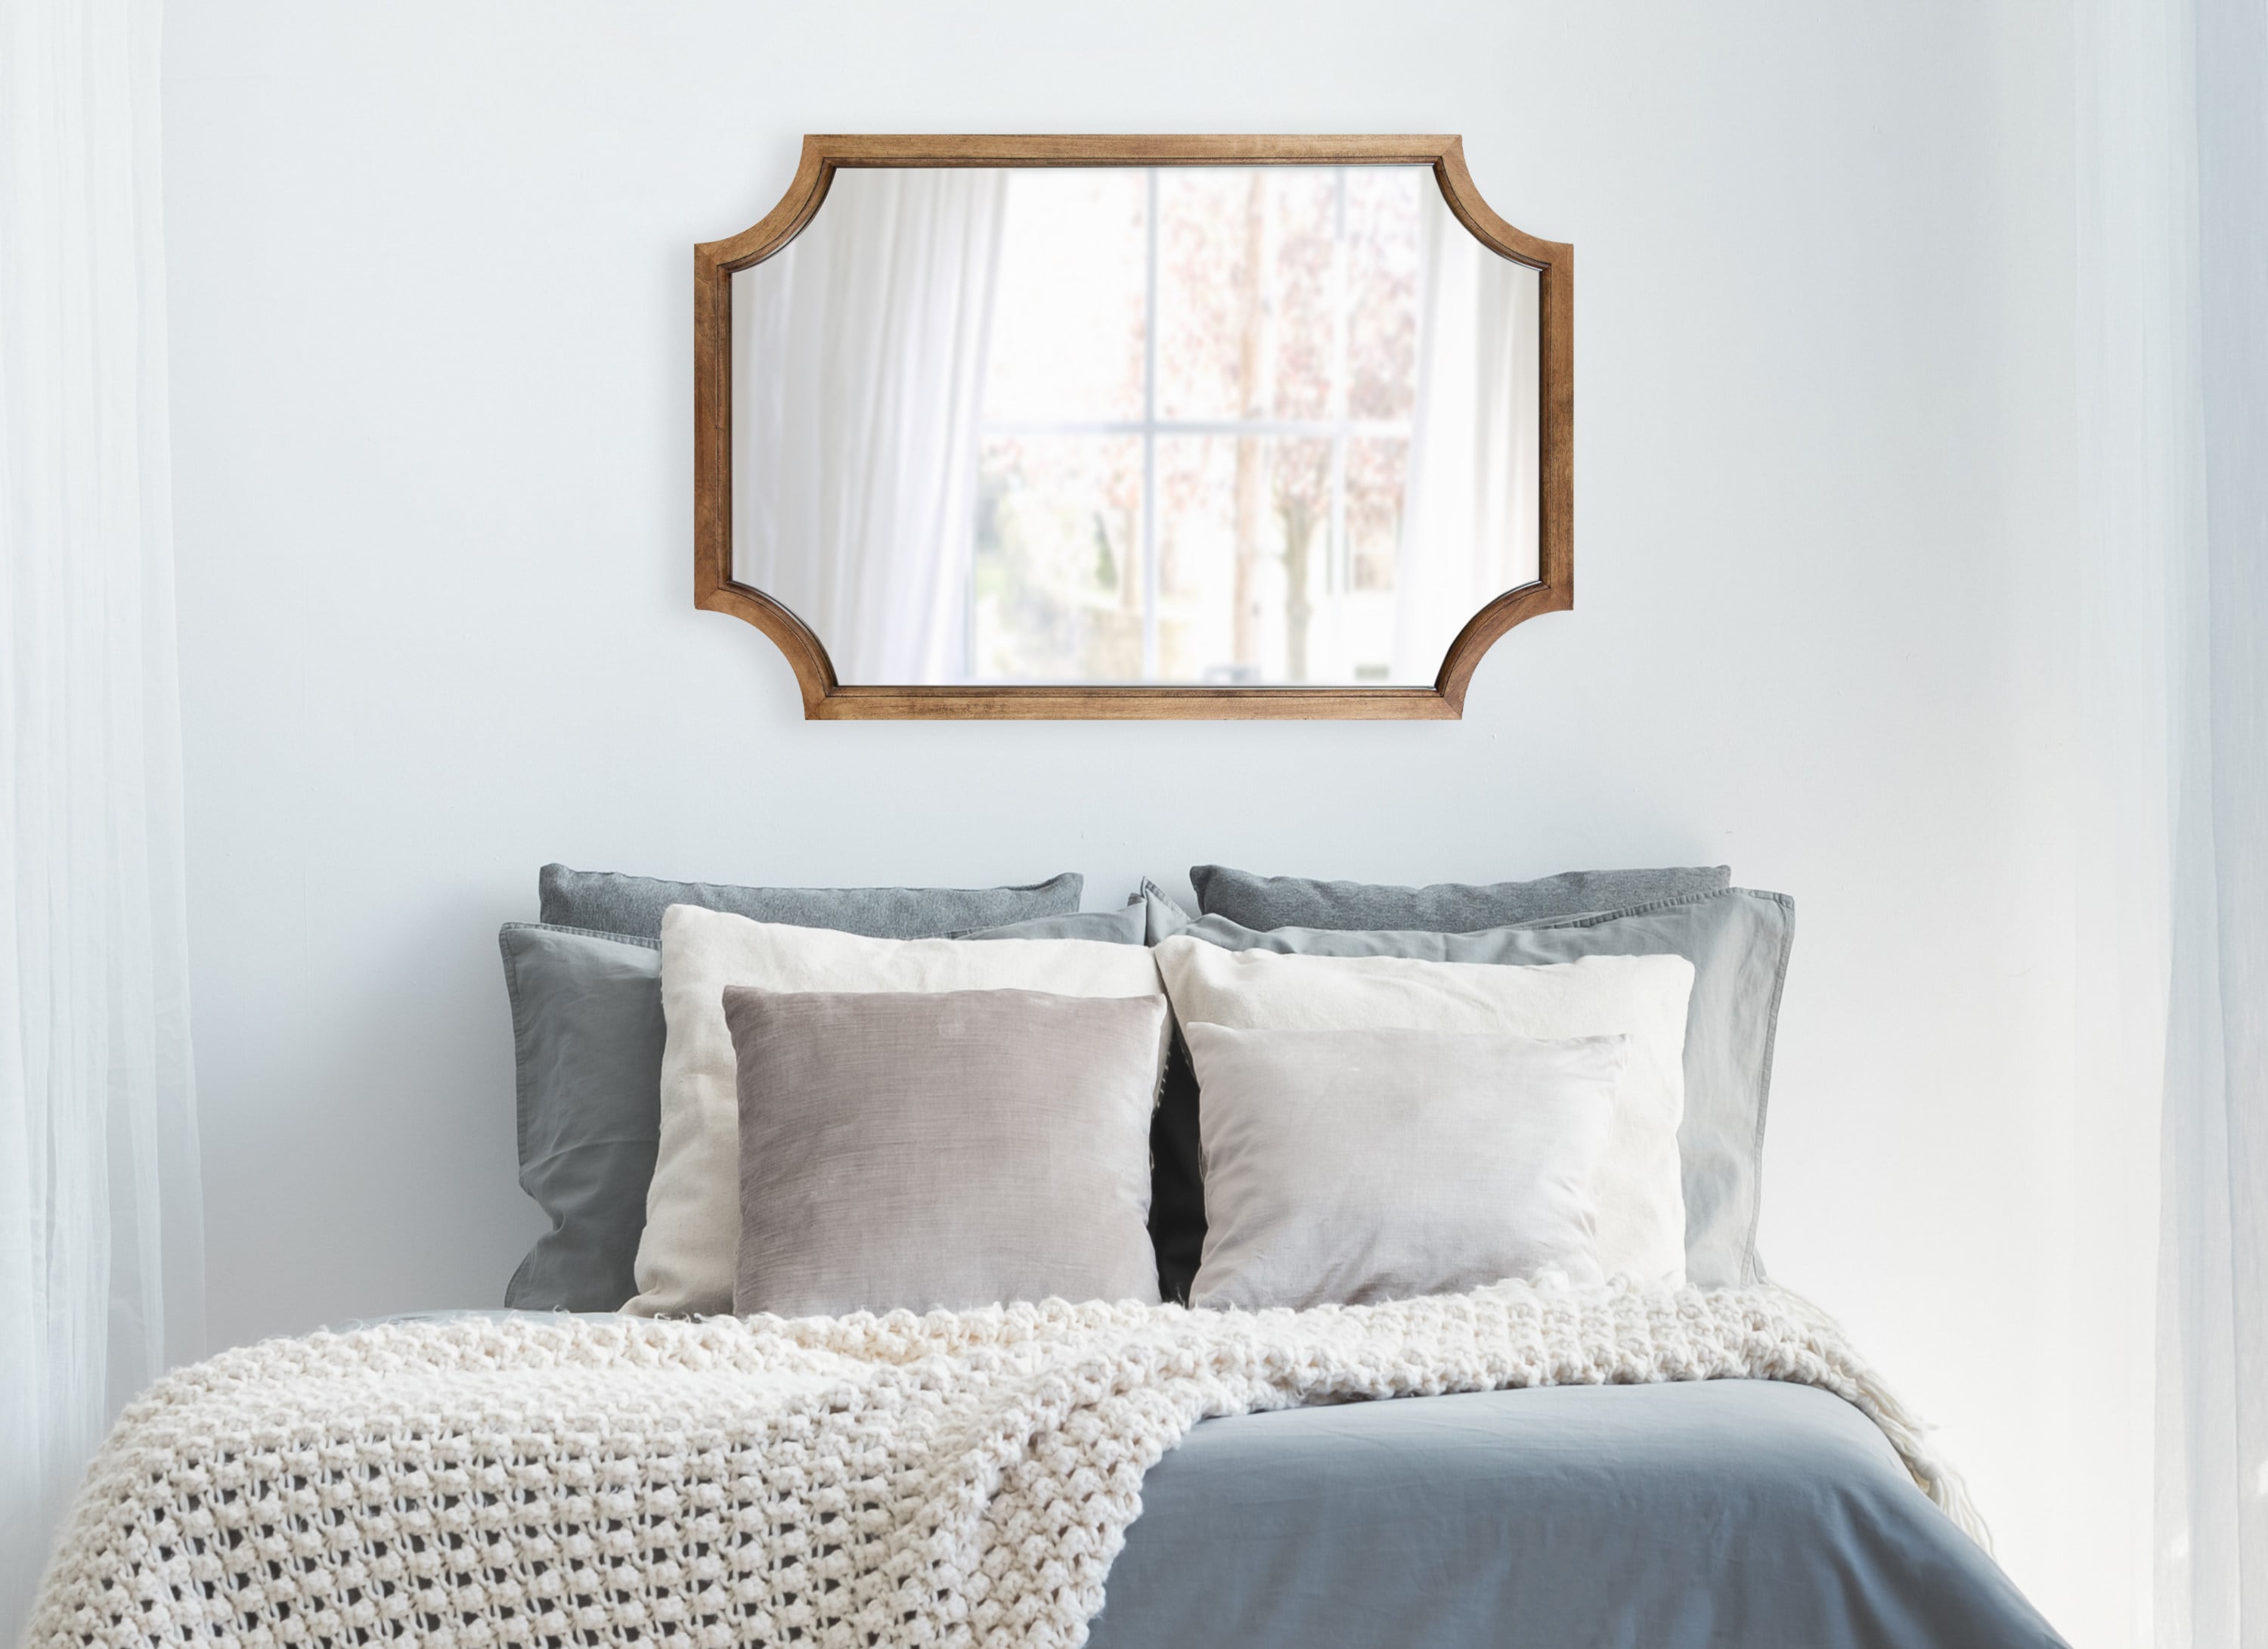 Kate and Laurel Hogan 24-in W x 36-in H Rustic Brown Framed Wall Mirror in  the Mirrors department at